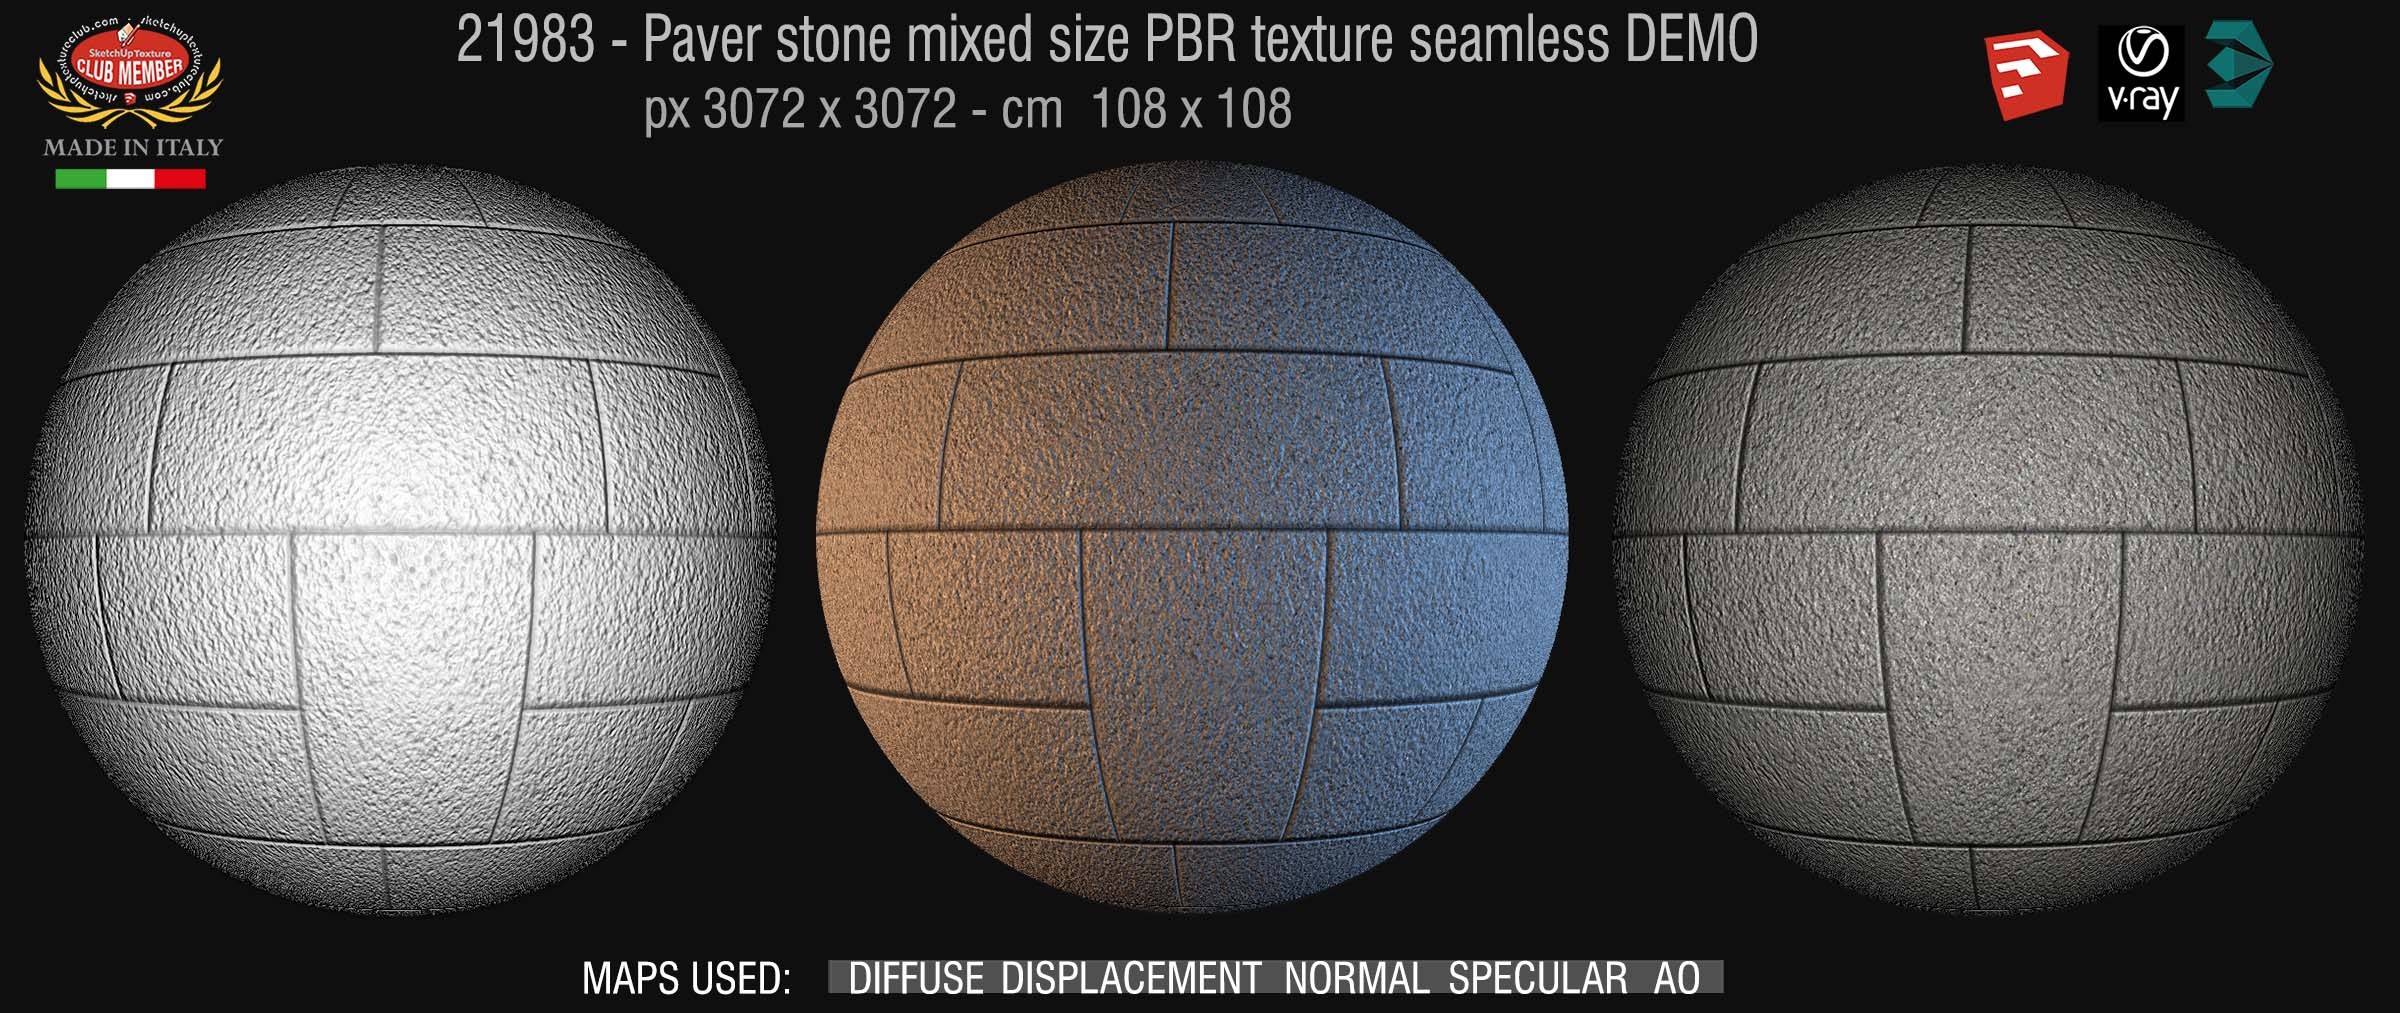 21983 pavers stone mixed size PBR texture seamless DEMO